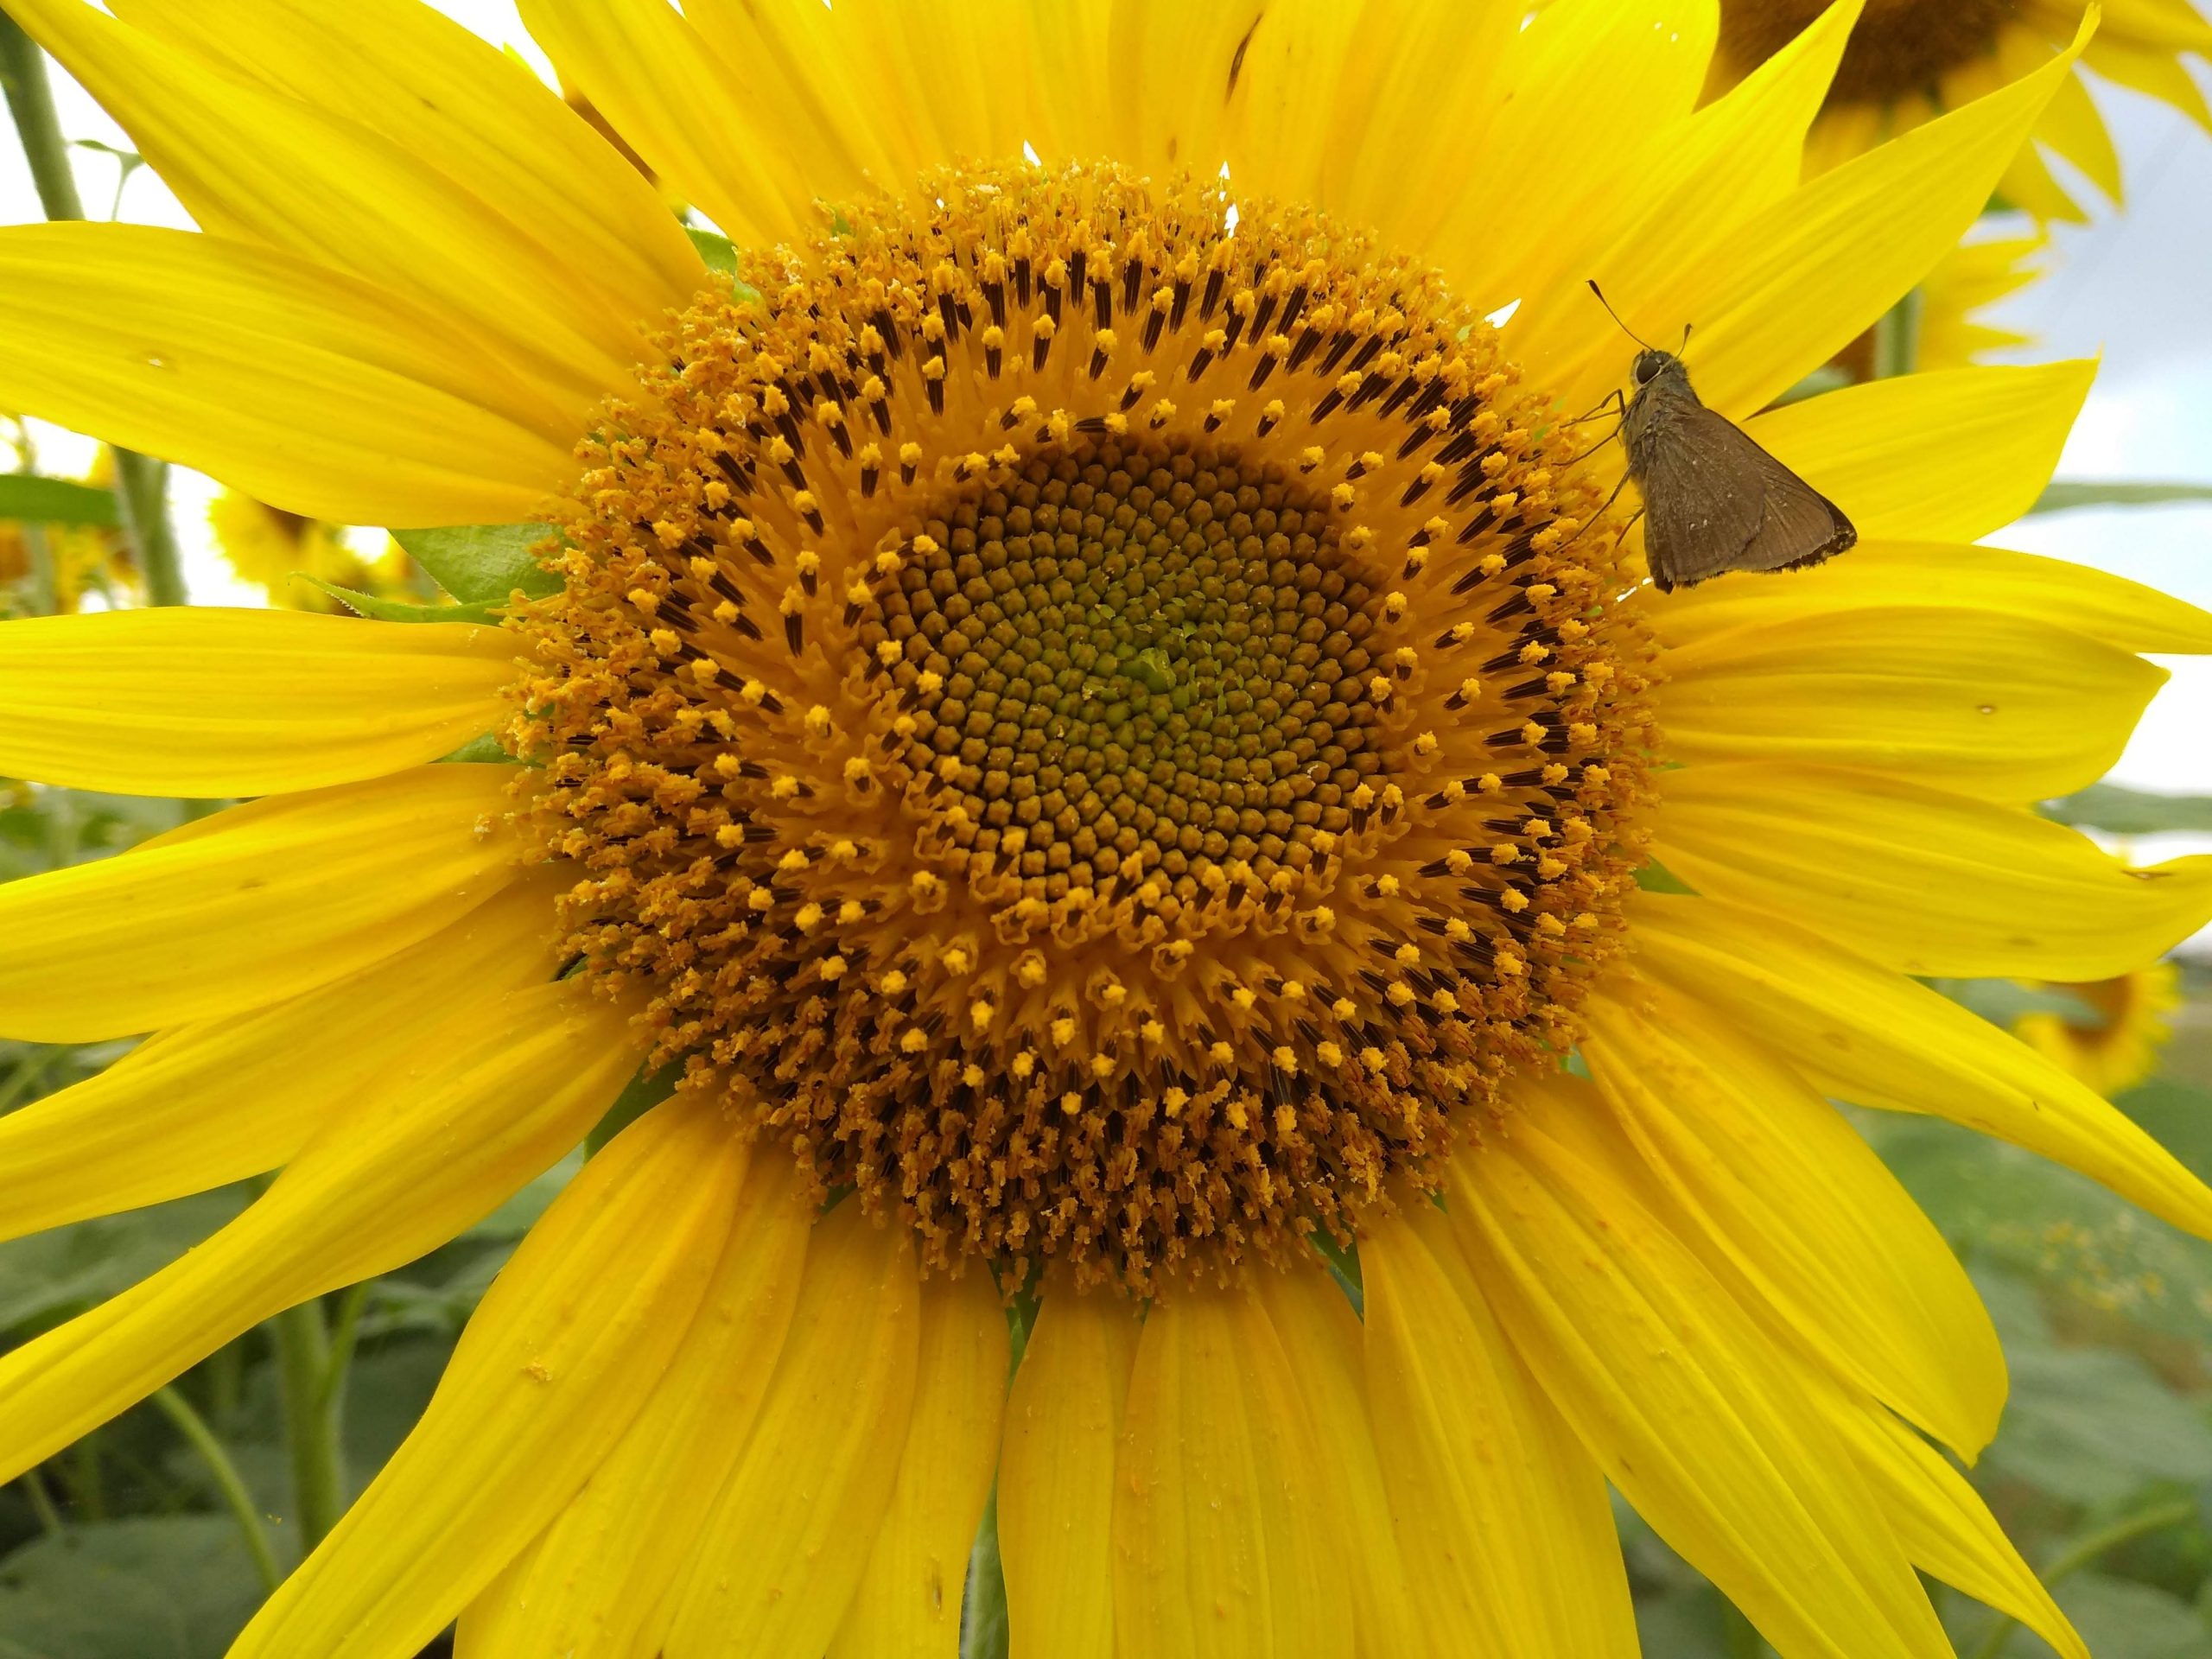 insect on sunflower